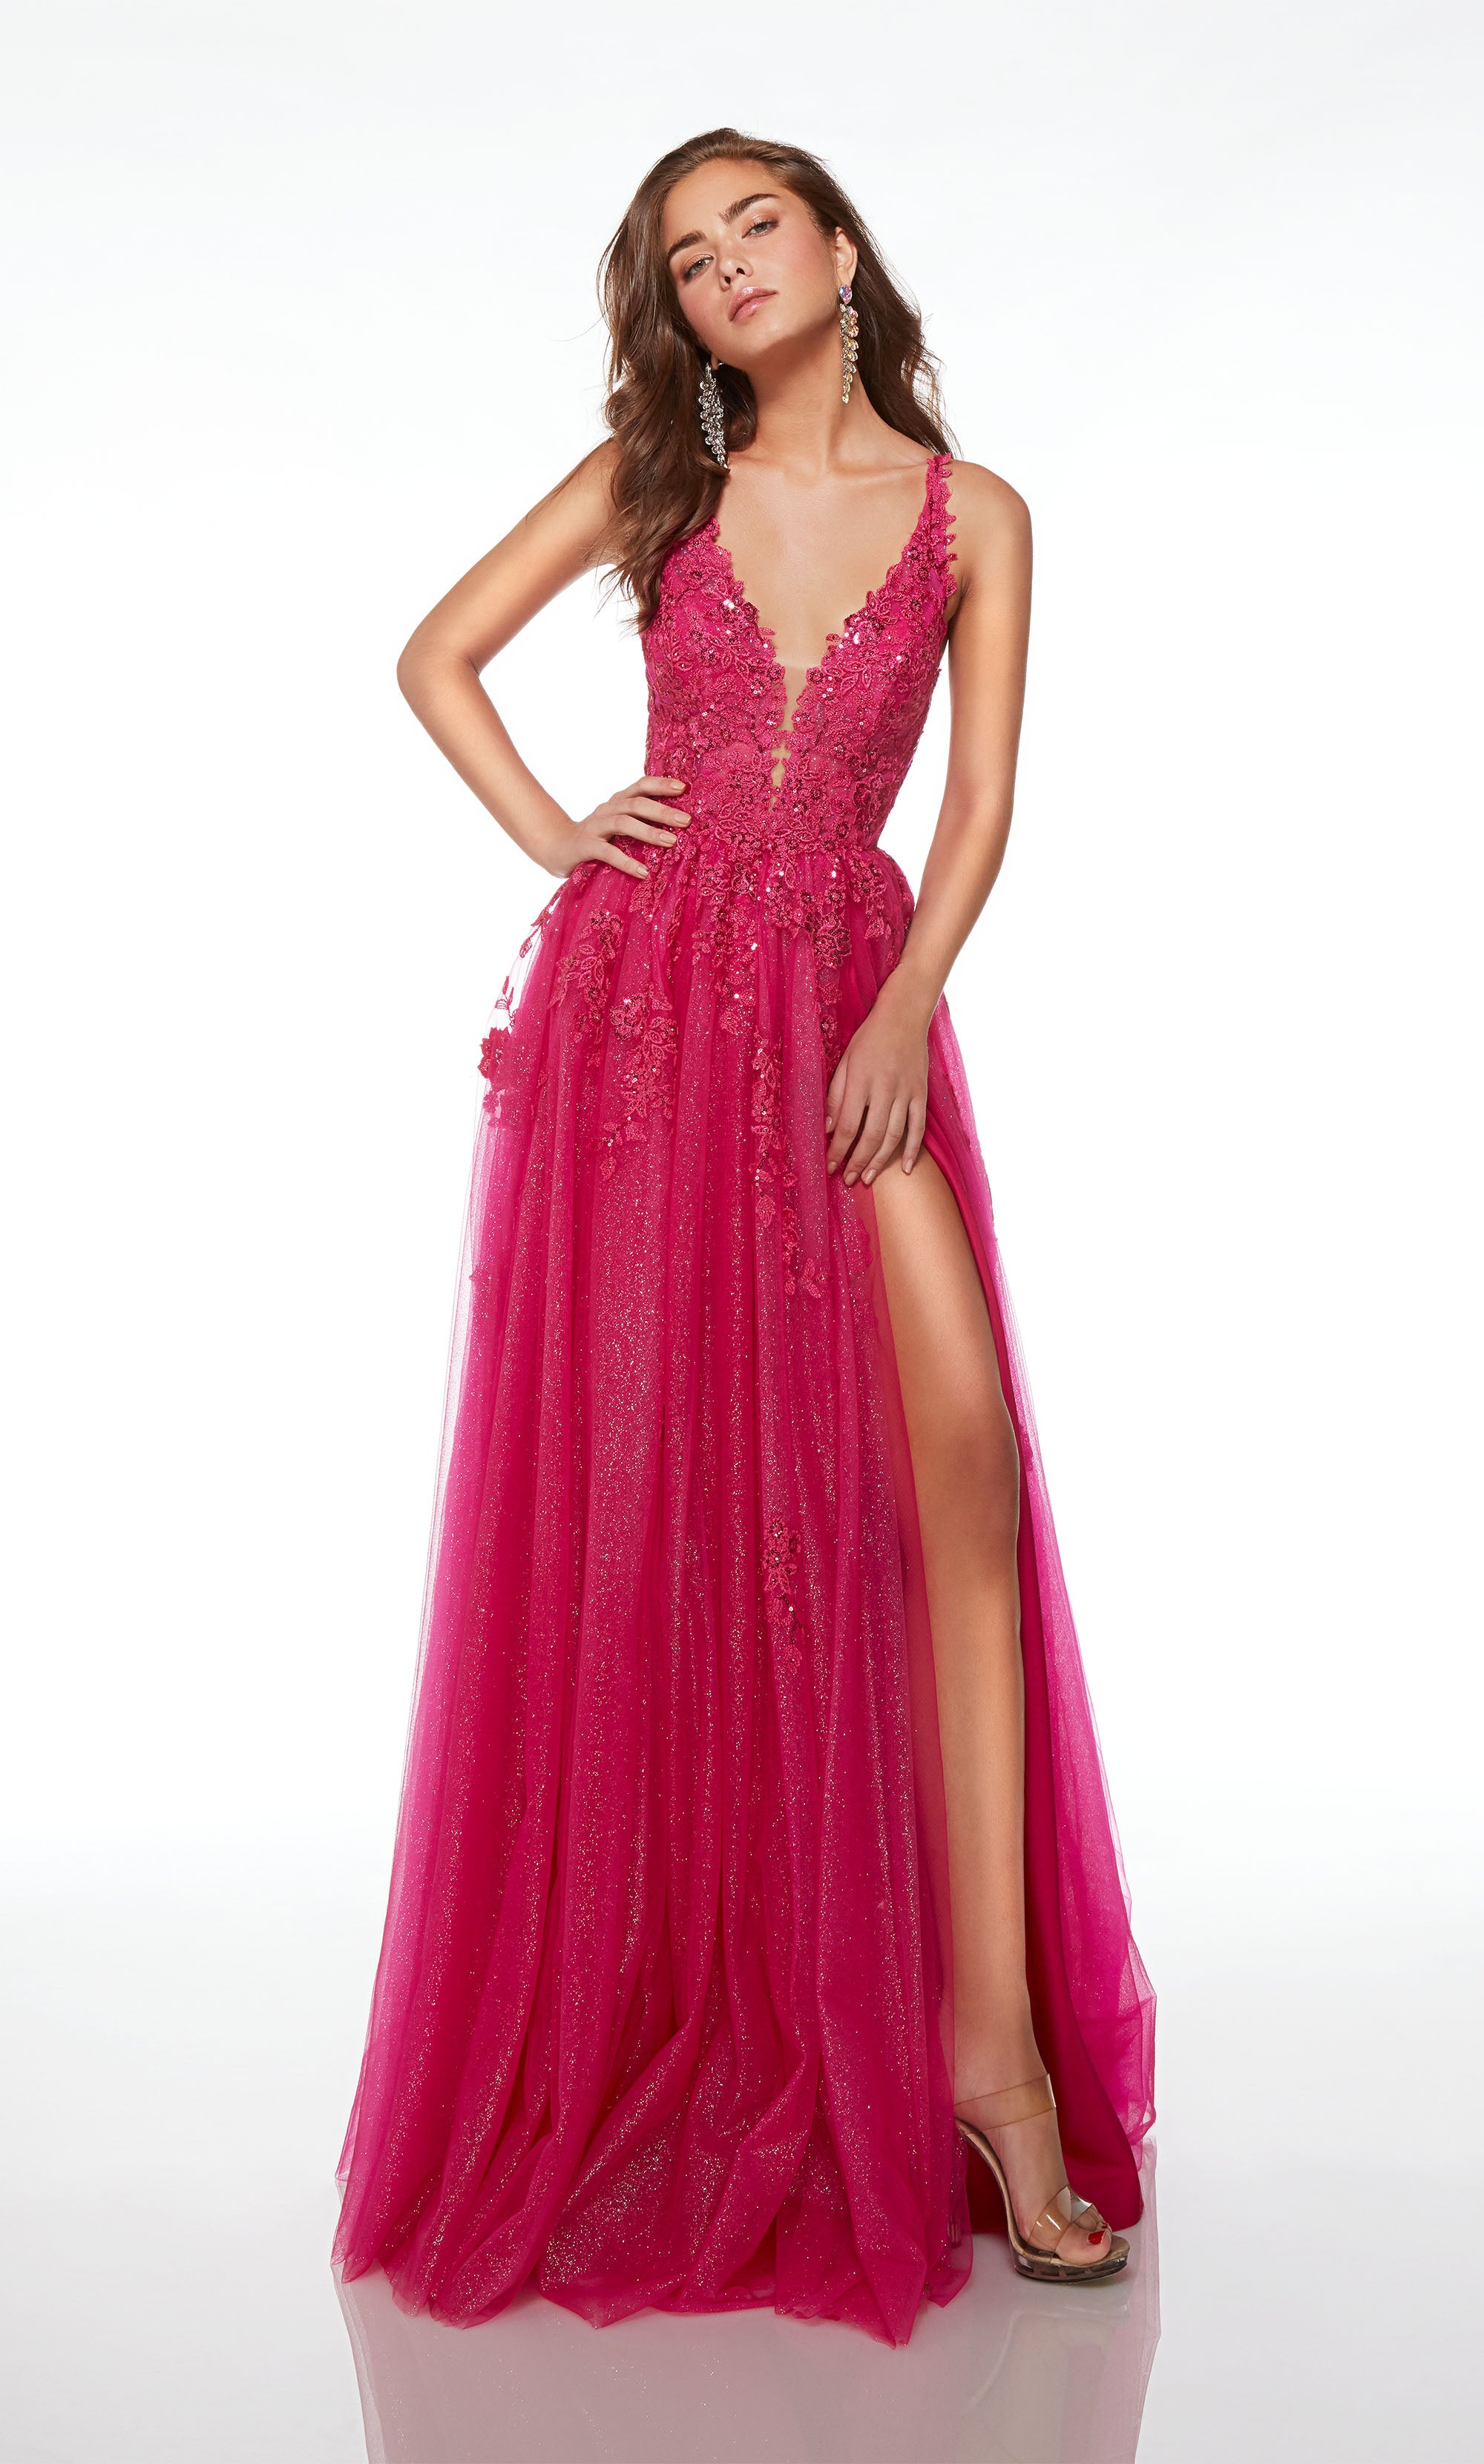 Whimsical pink prom dress: plunging neckline, high side slit, train, floral lace, and glitter tulle fabric for an charming boho chic vibe.